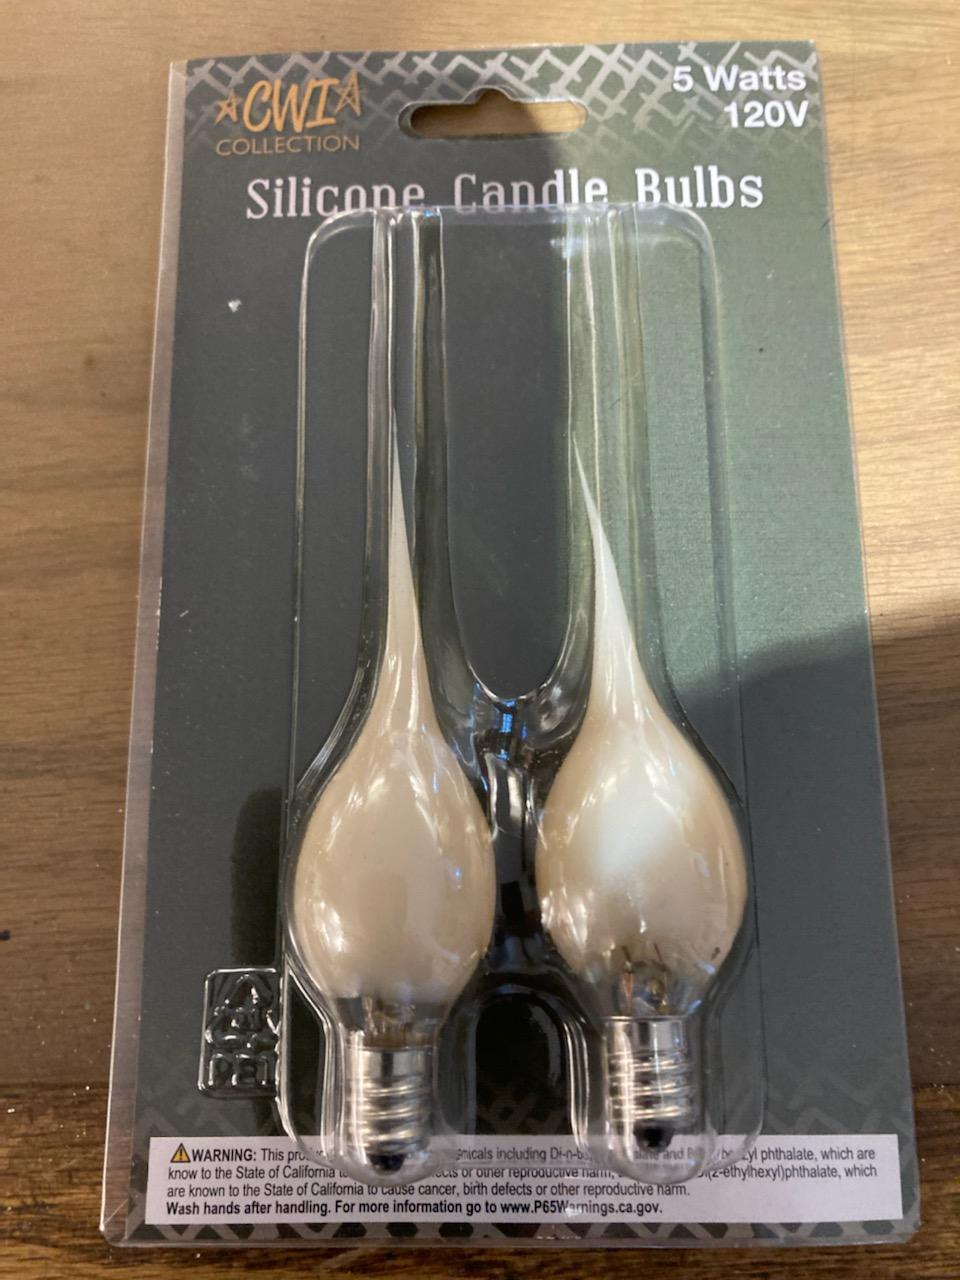 CWI Silicone Candle Bulbs - 5 Watts - cream color